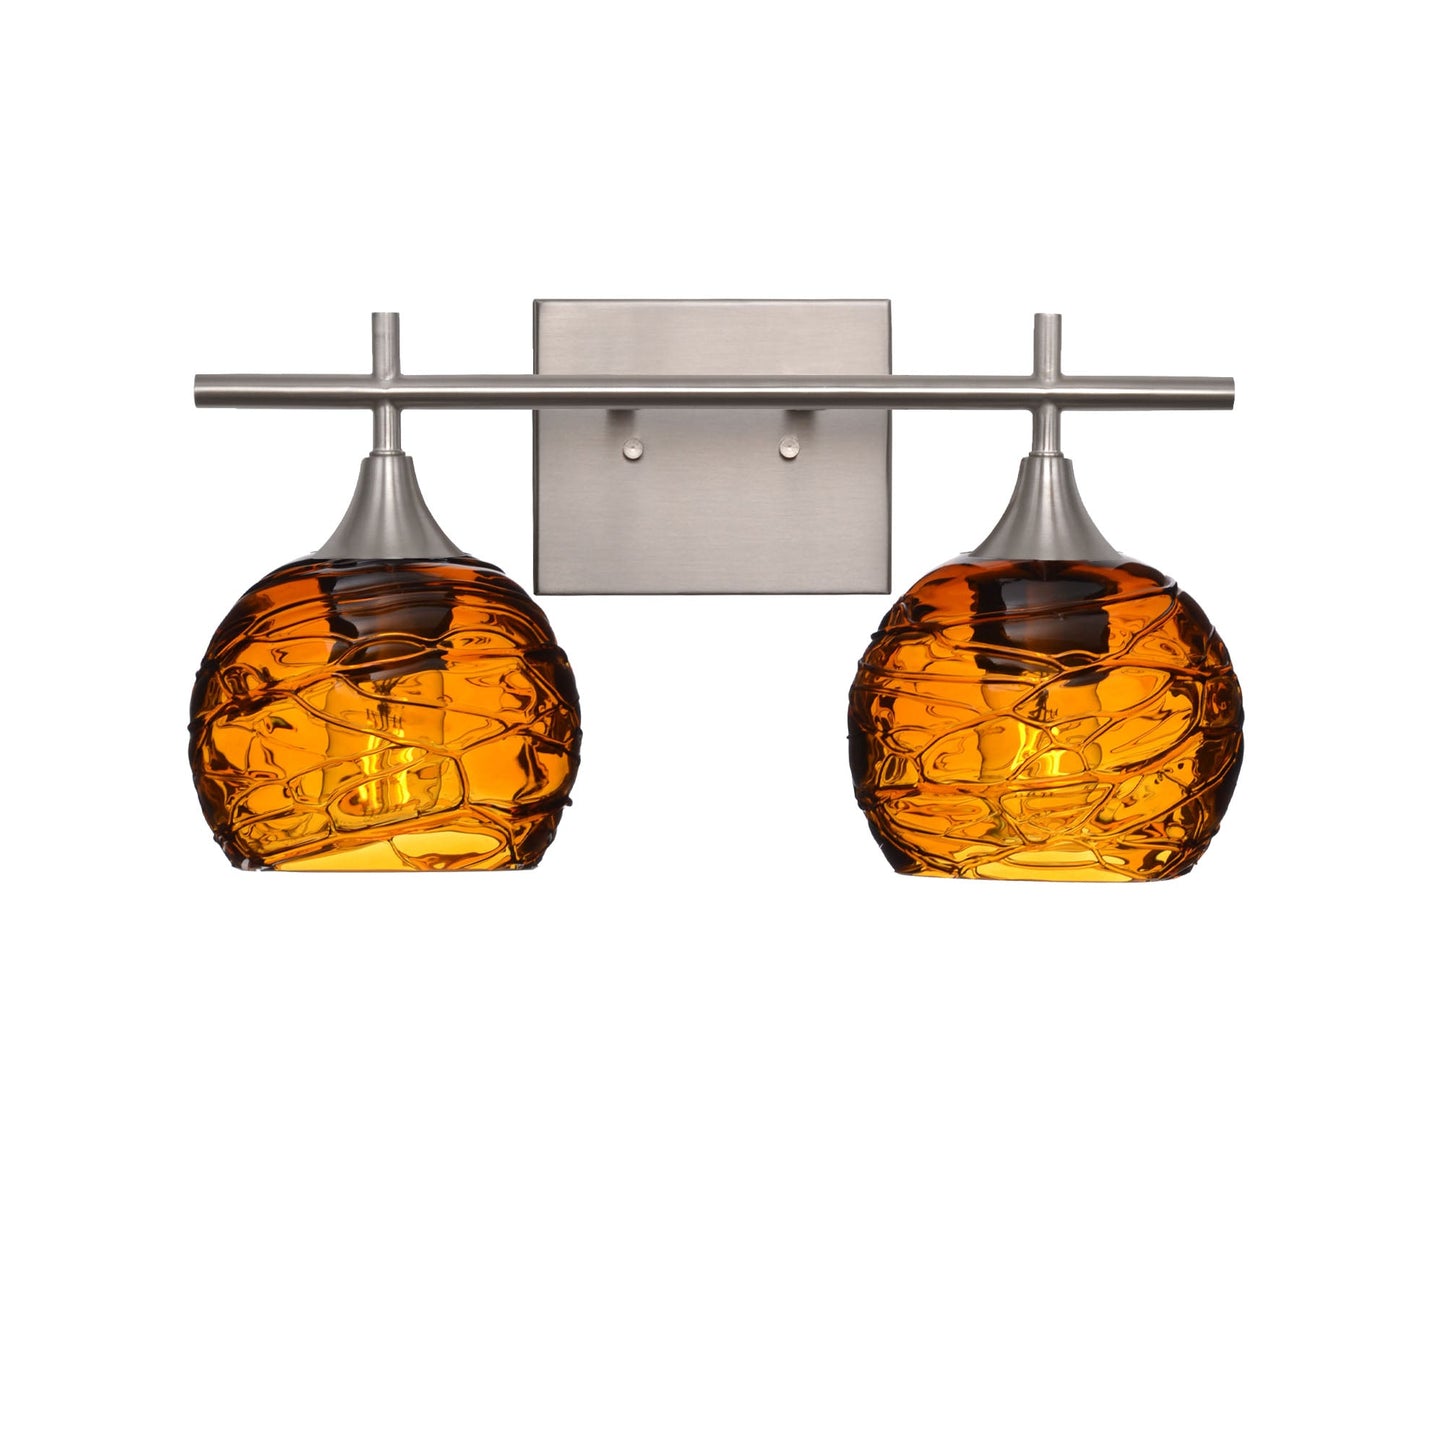 763 Spun: 2 Light Wall Vanity-Glass-Bicycle Glass Co - Hotshop-Golden Amber-Brushed Nickel-Bicycle Glass Co